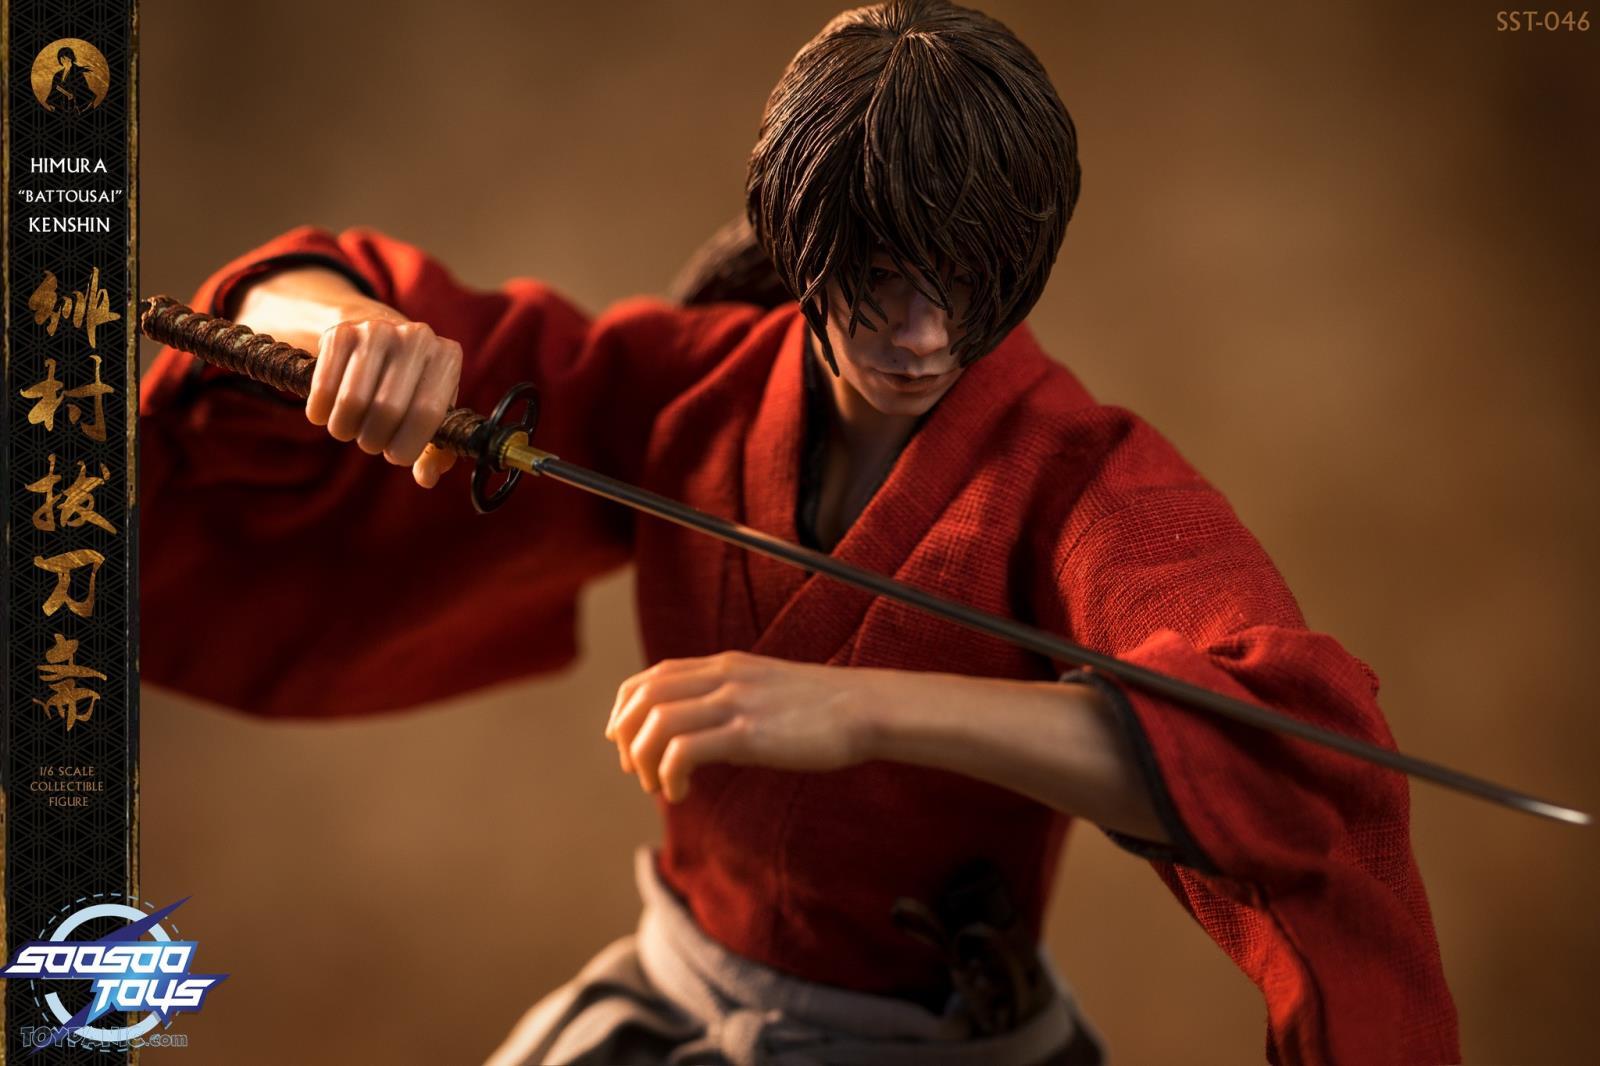 japanese - NEW PRODUCT: 1/6 scale Rurouni Kenshin Collectible Figure from SooSooToys 712202251230PM_8303448